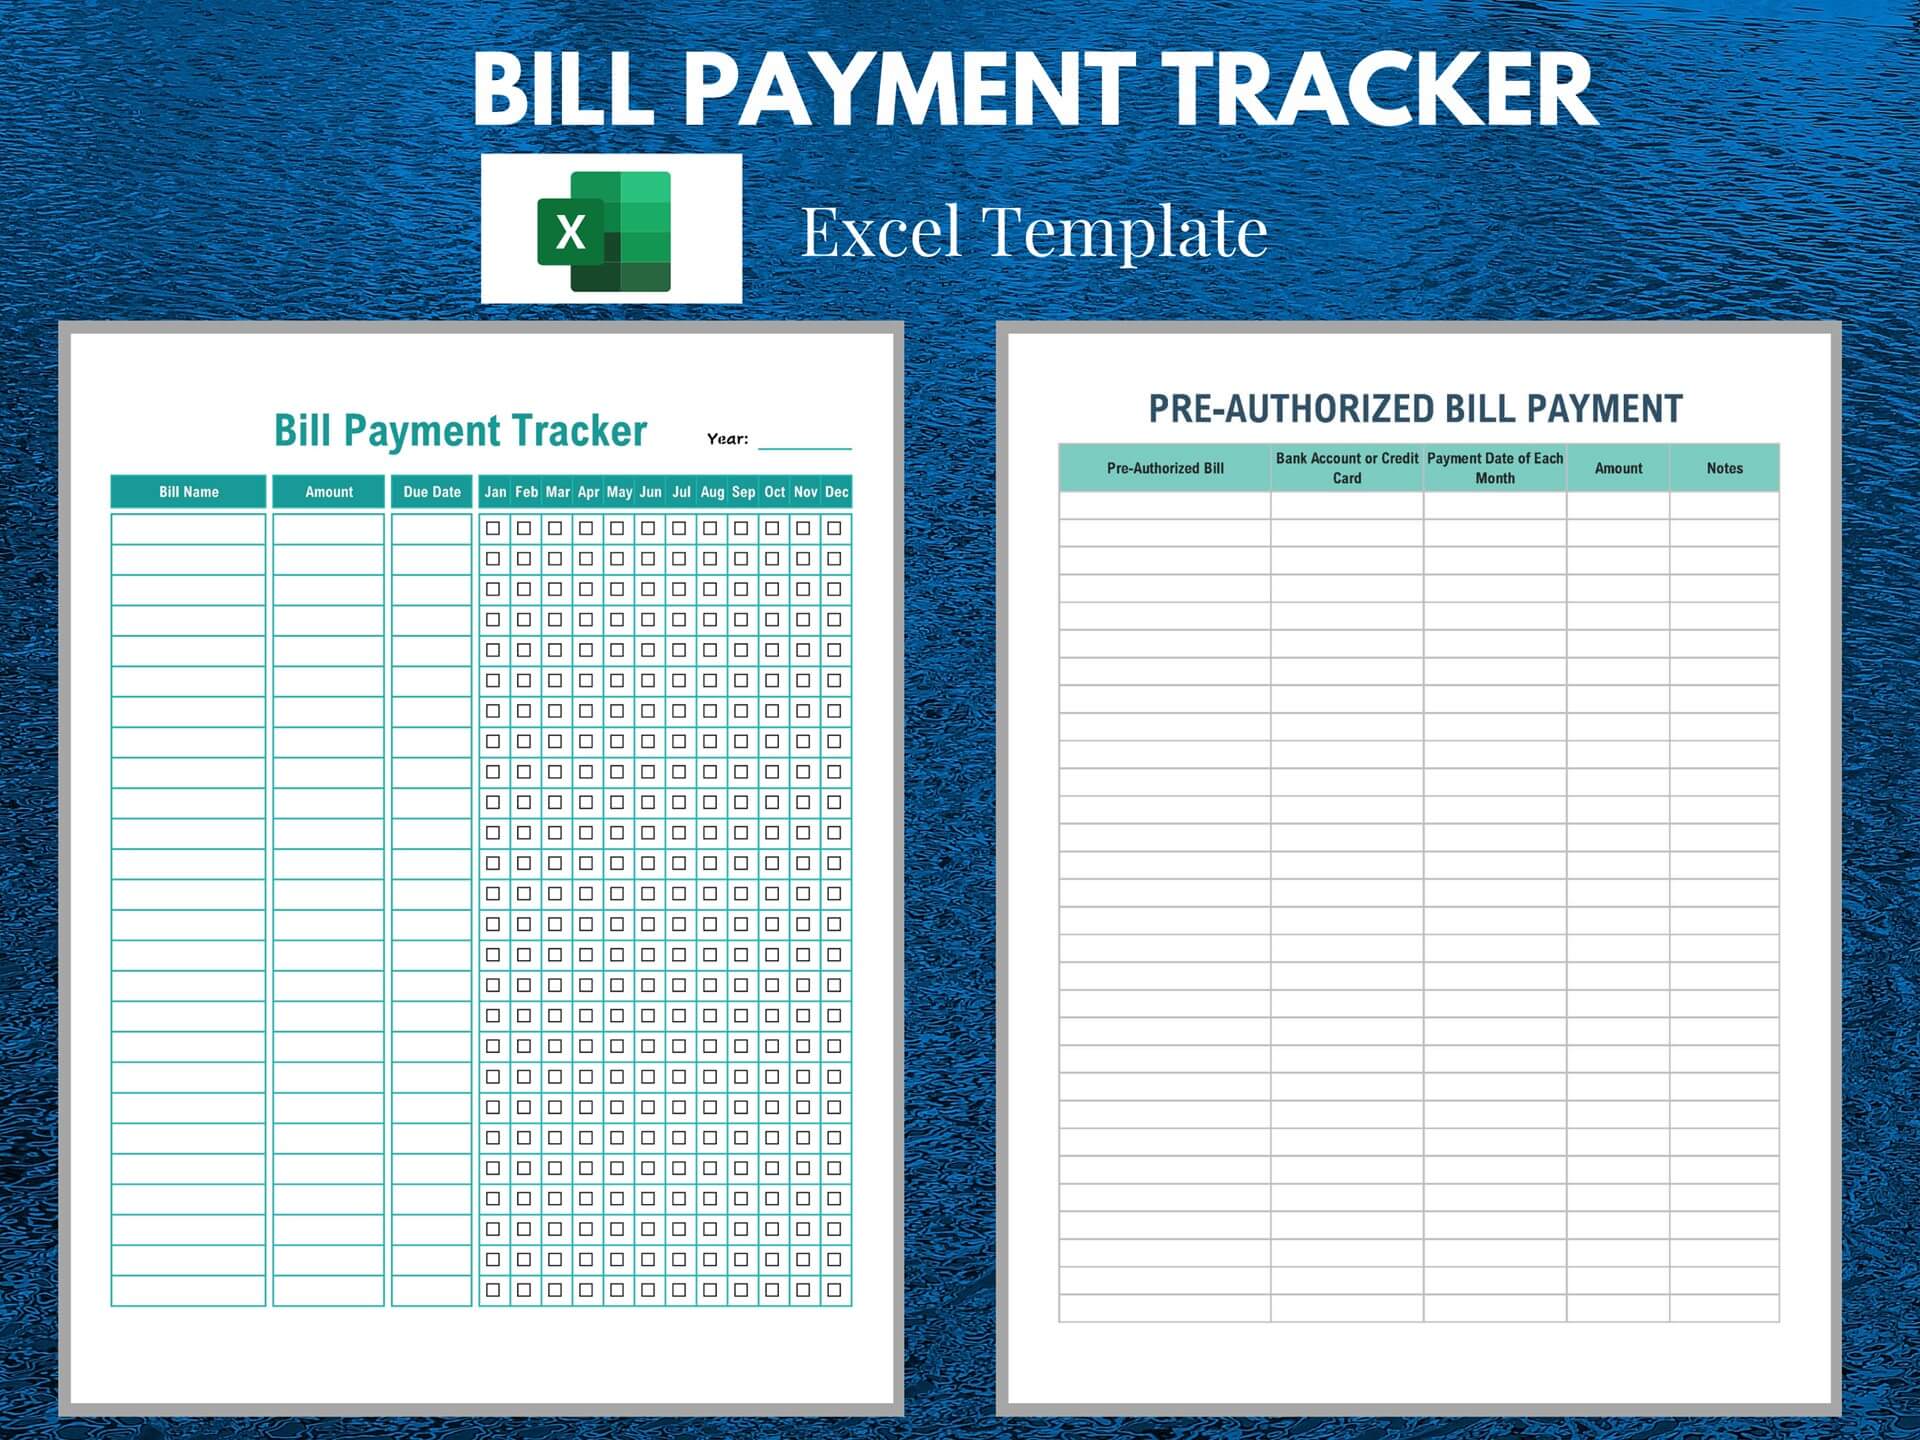 bill-payment-tracker-excel-template-and-digitally-fillable-pdf-instant-download-excel-and